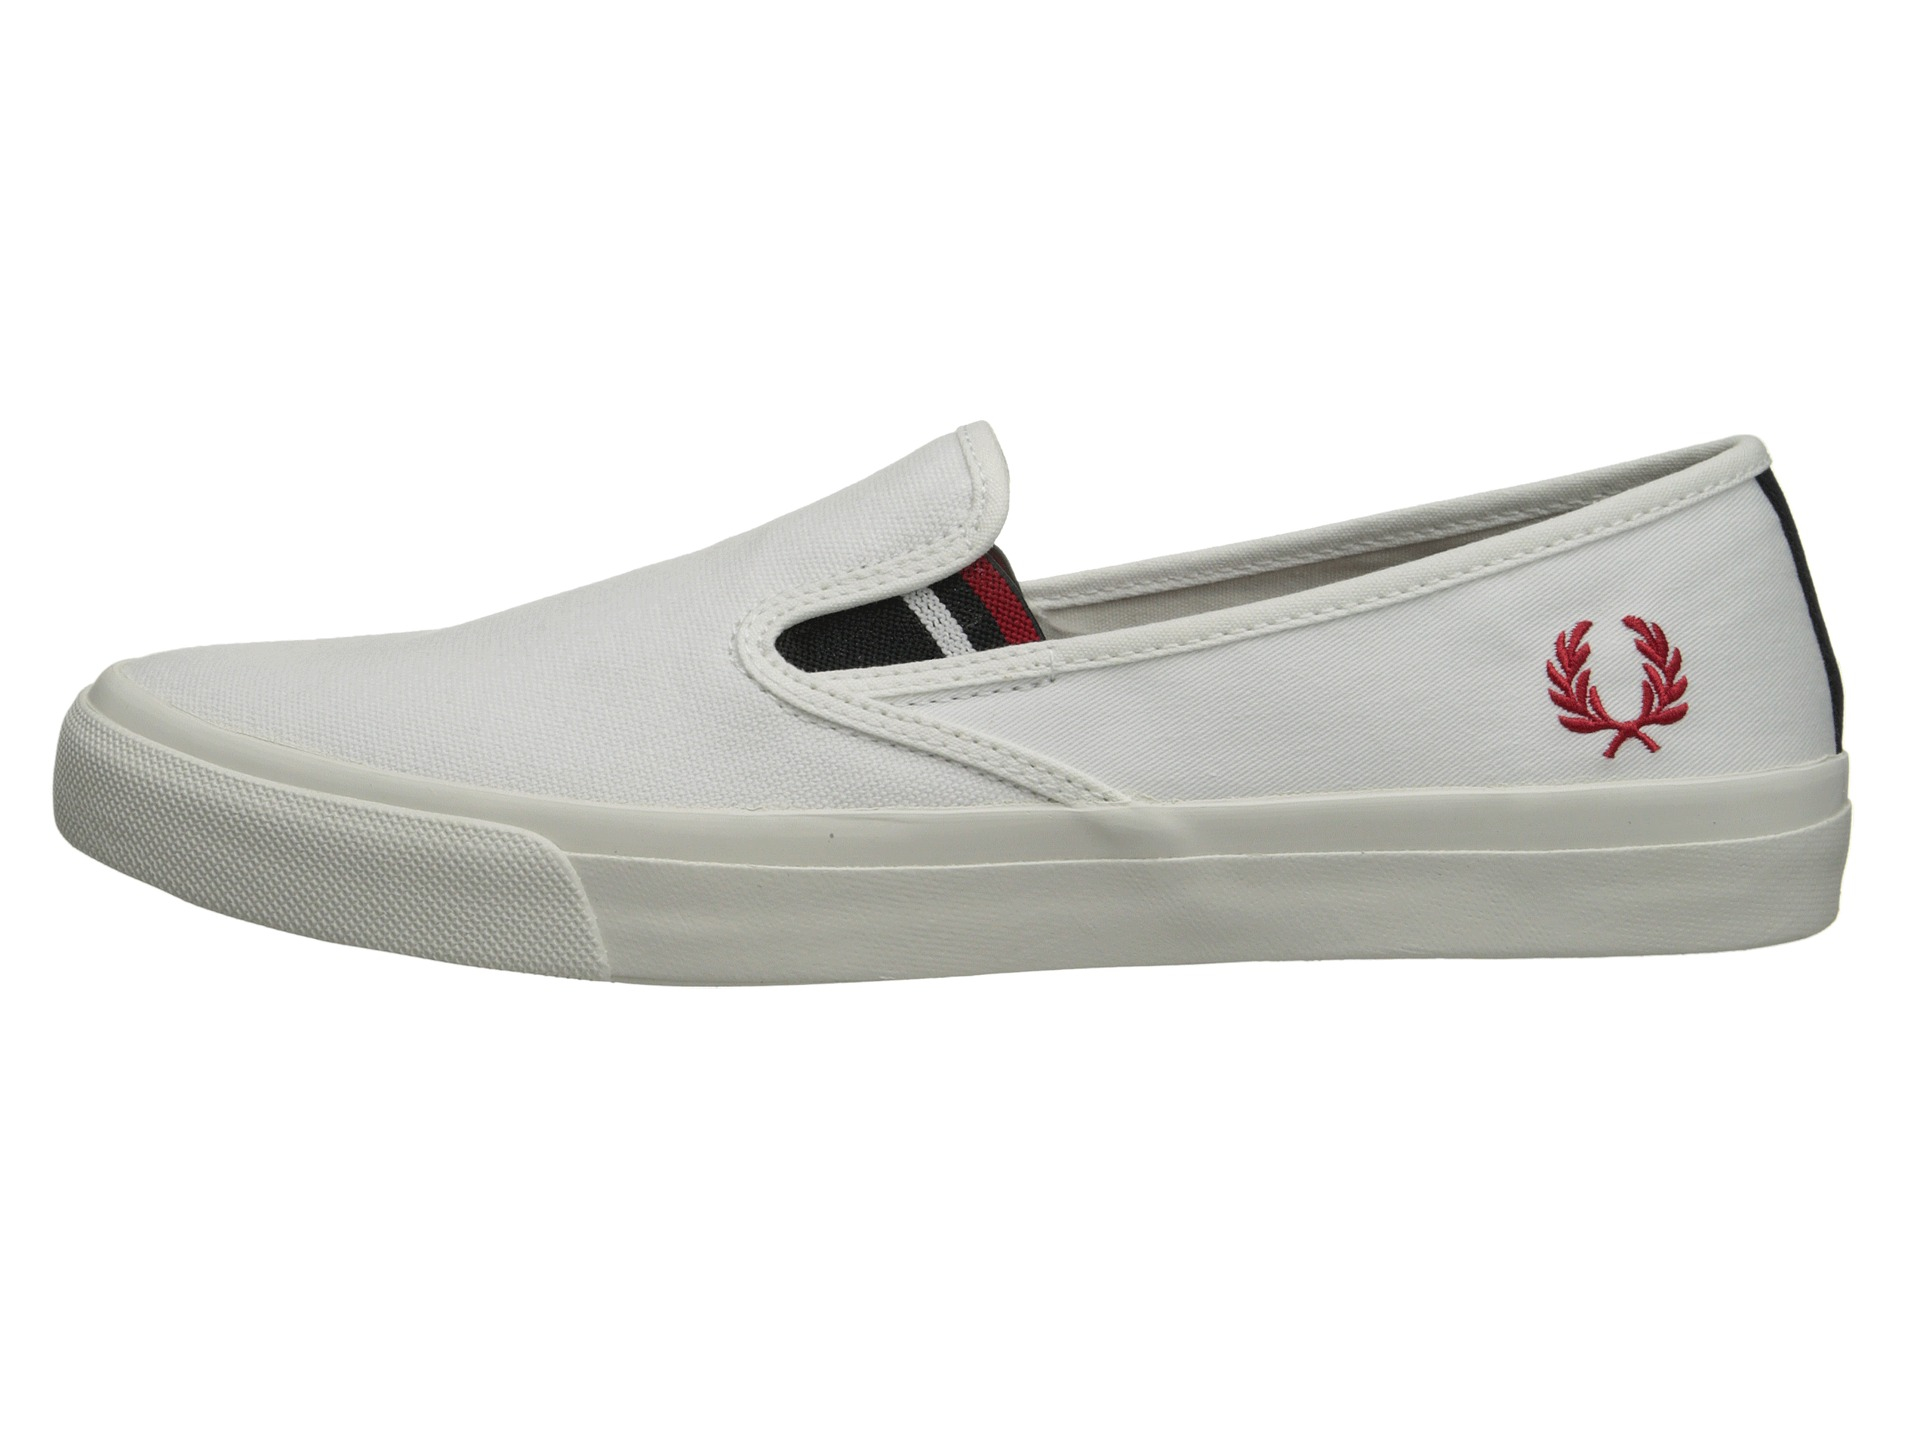 Lyst Fred Perry Turner Slip On Canvas In White For Men 